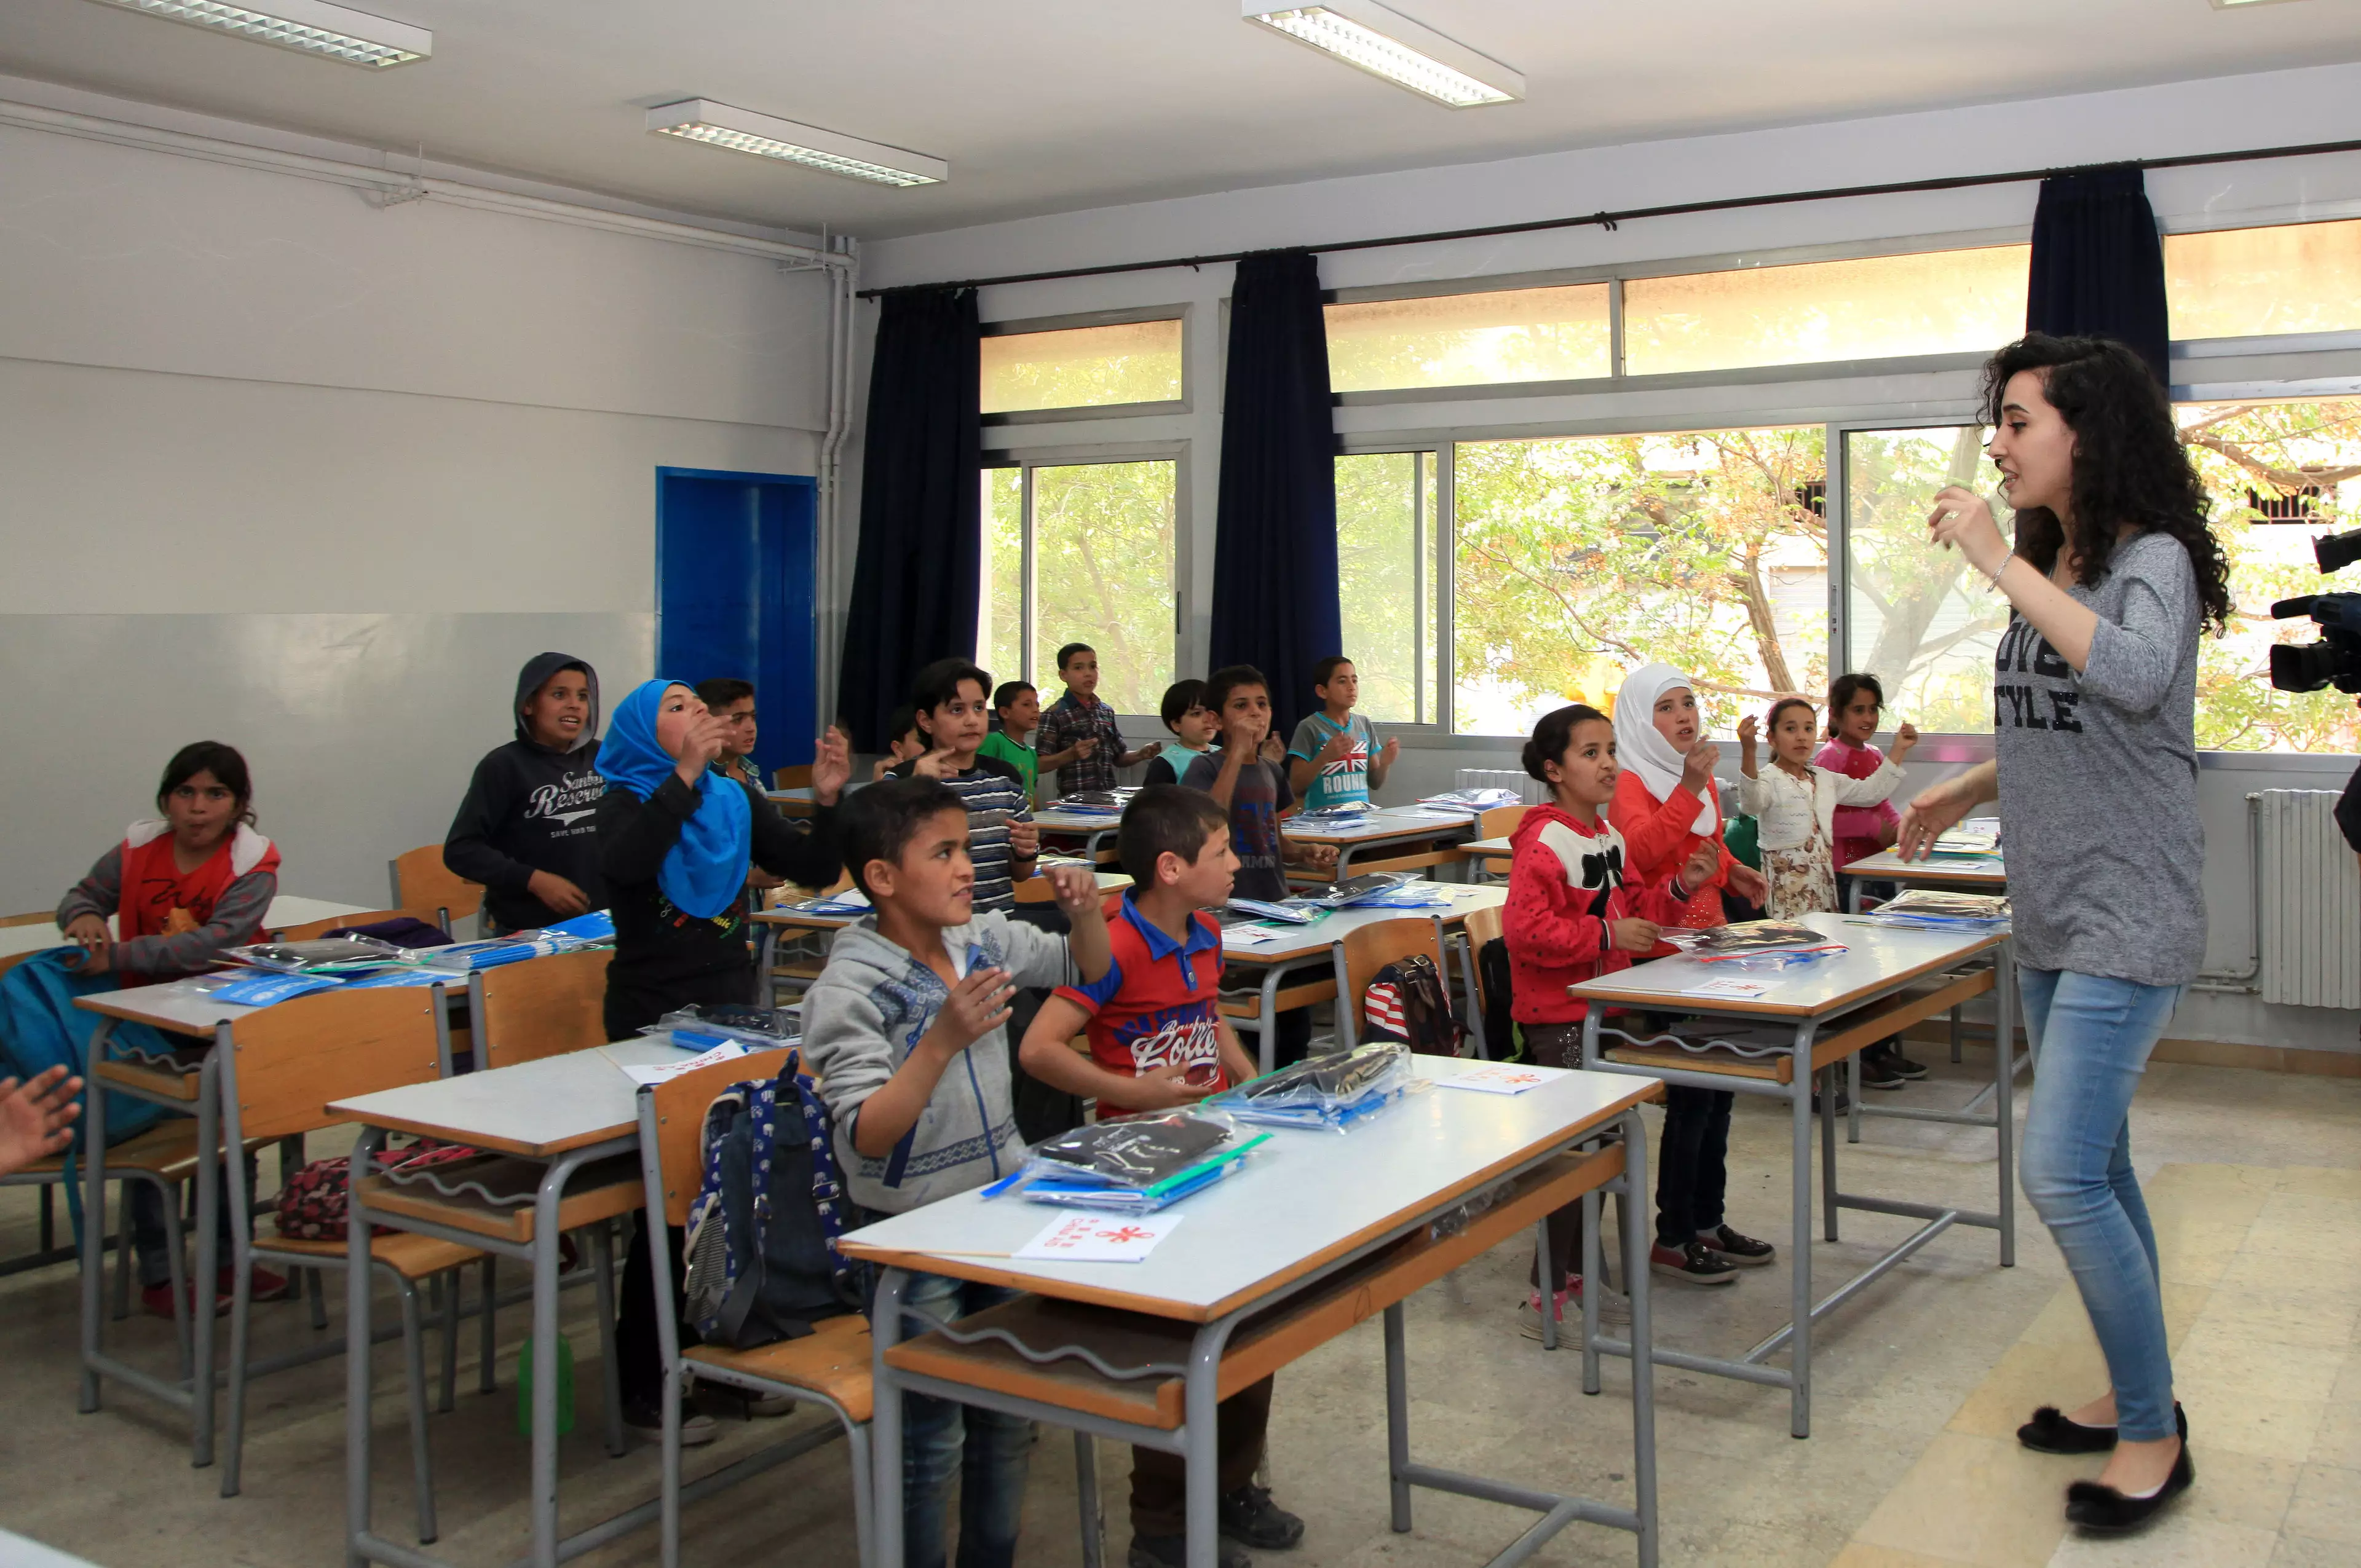 Syrian children being taught at a school in Lebanon